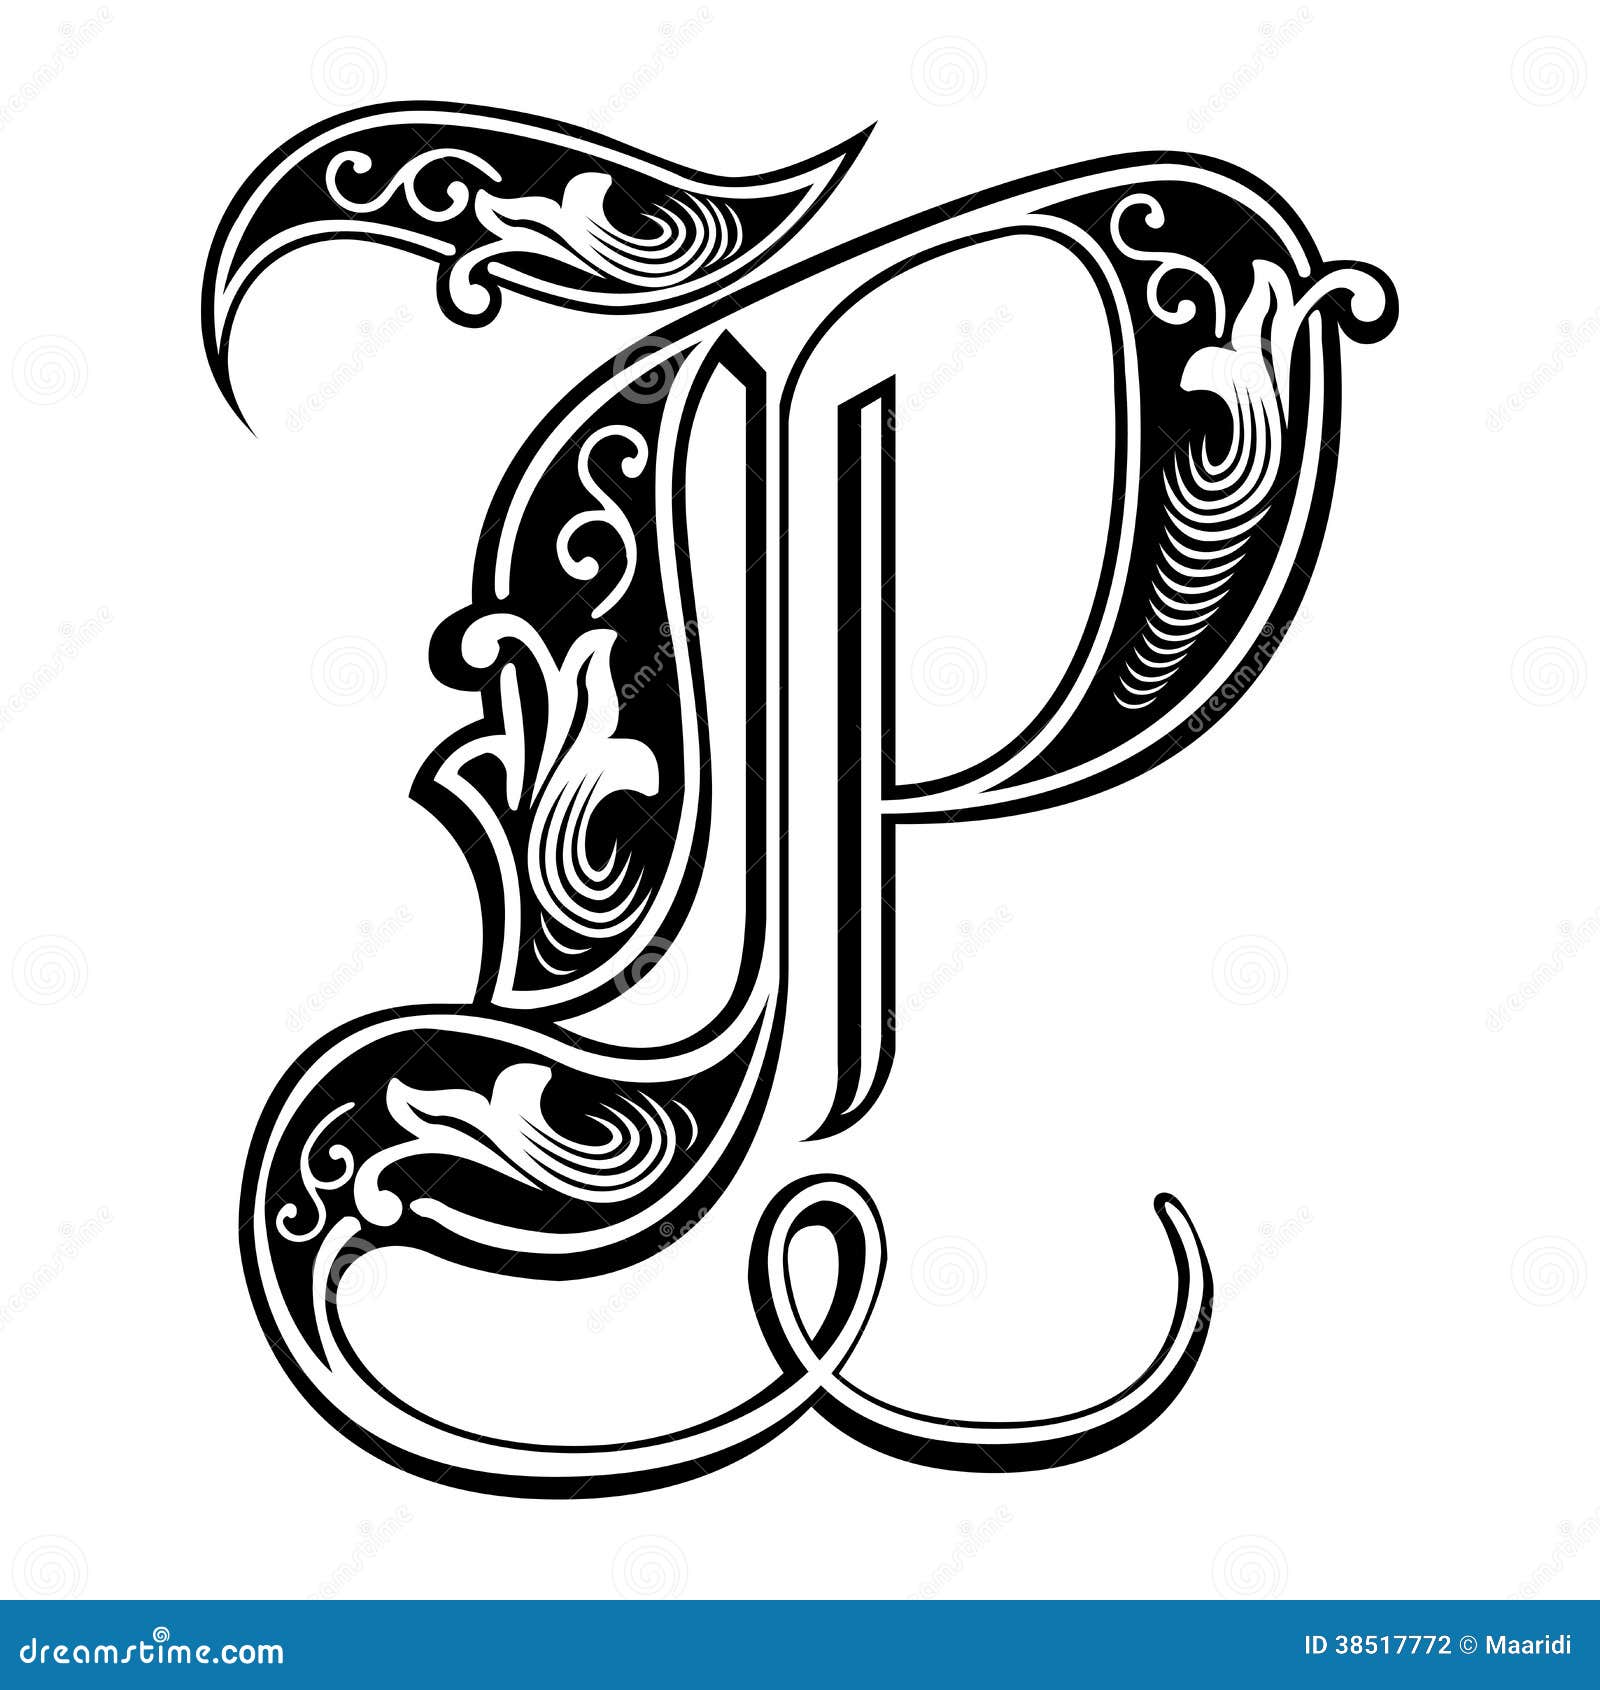 garnished gothic style font, letter p